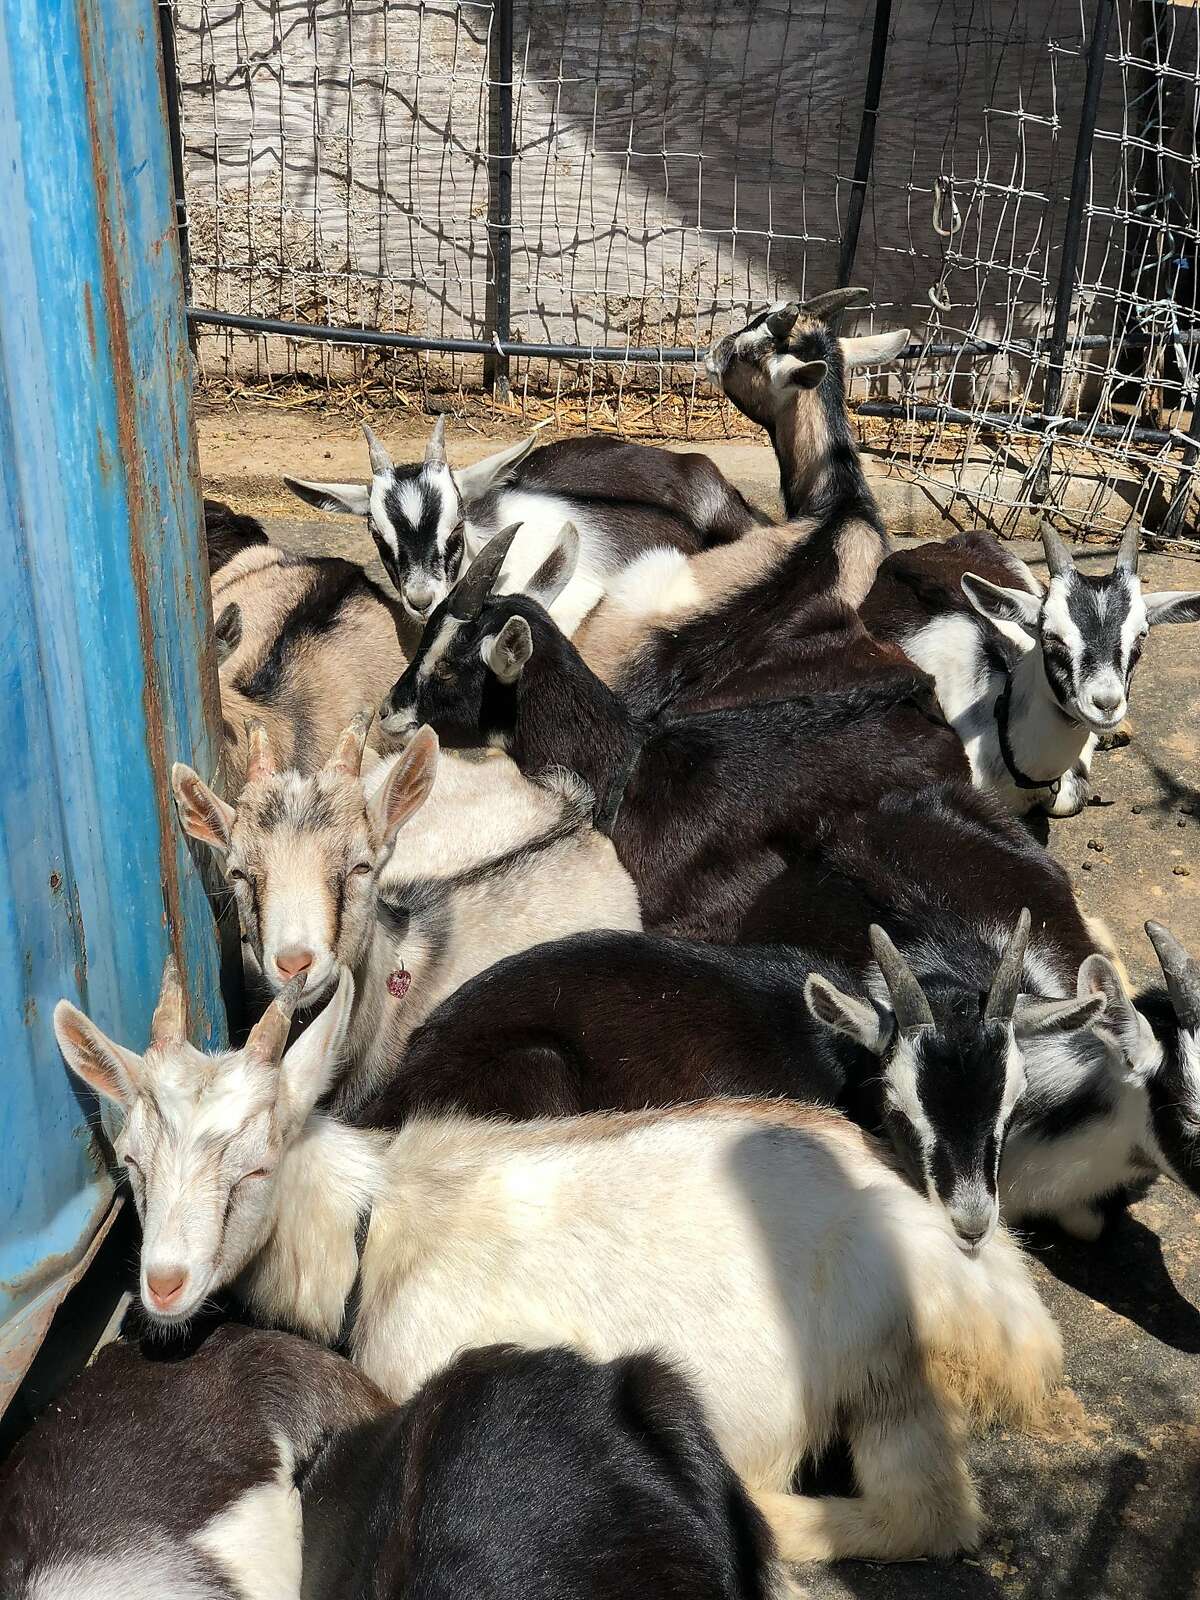 Several hard-working goats for City Grazing, a Bayview-based nonprofit that provides goat workers to clear hard-to-navigate spaces for city agencies, hospitals, and homeowners in San Francisco.